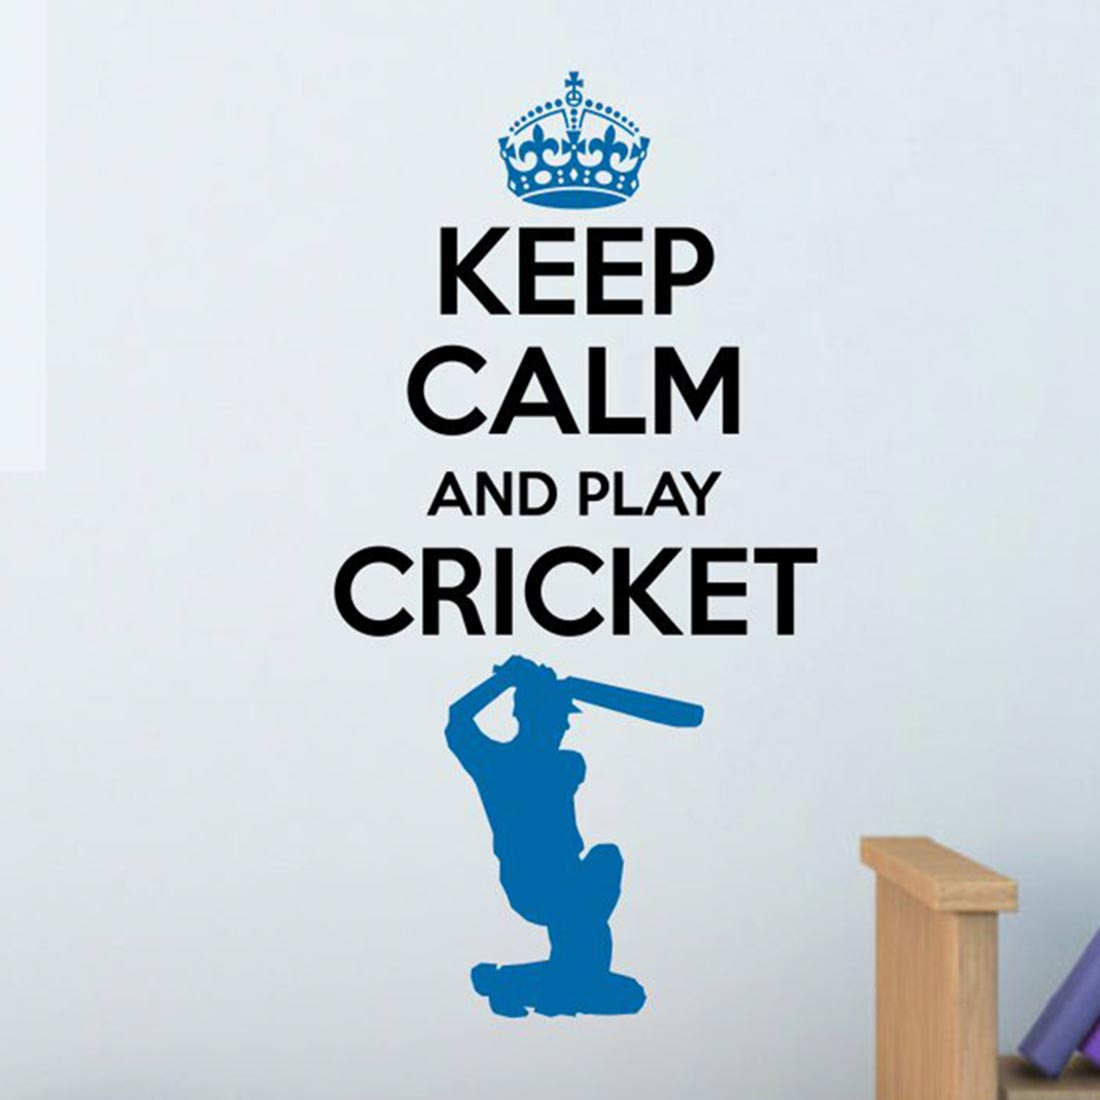 Keep Calm Quotes Play Cricket - Wall Stickers & Decals by Asian Paints